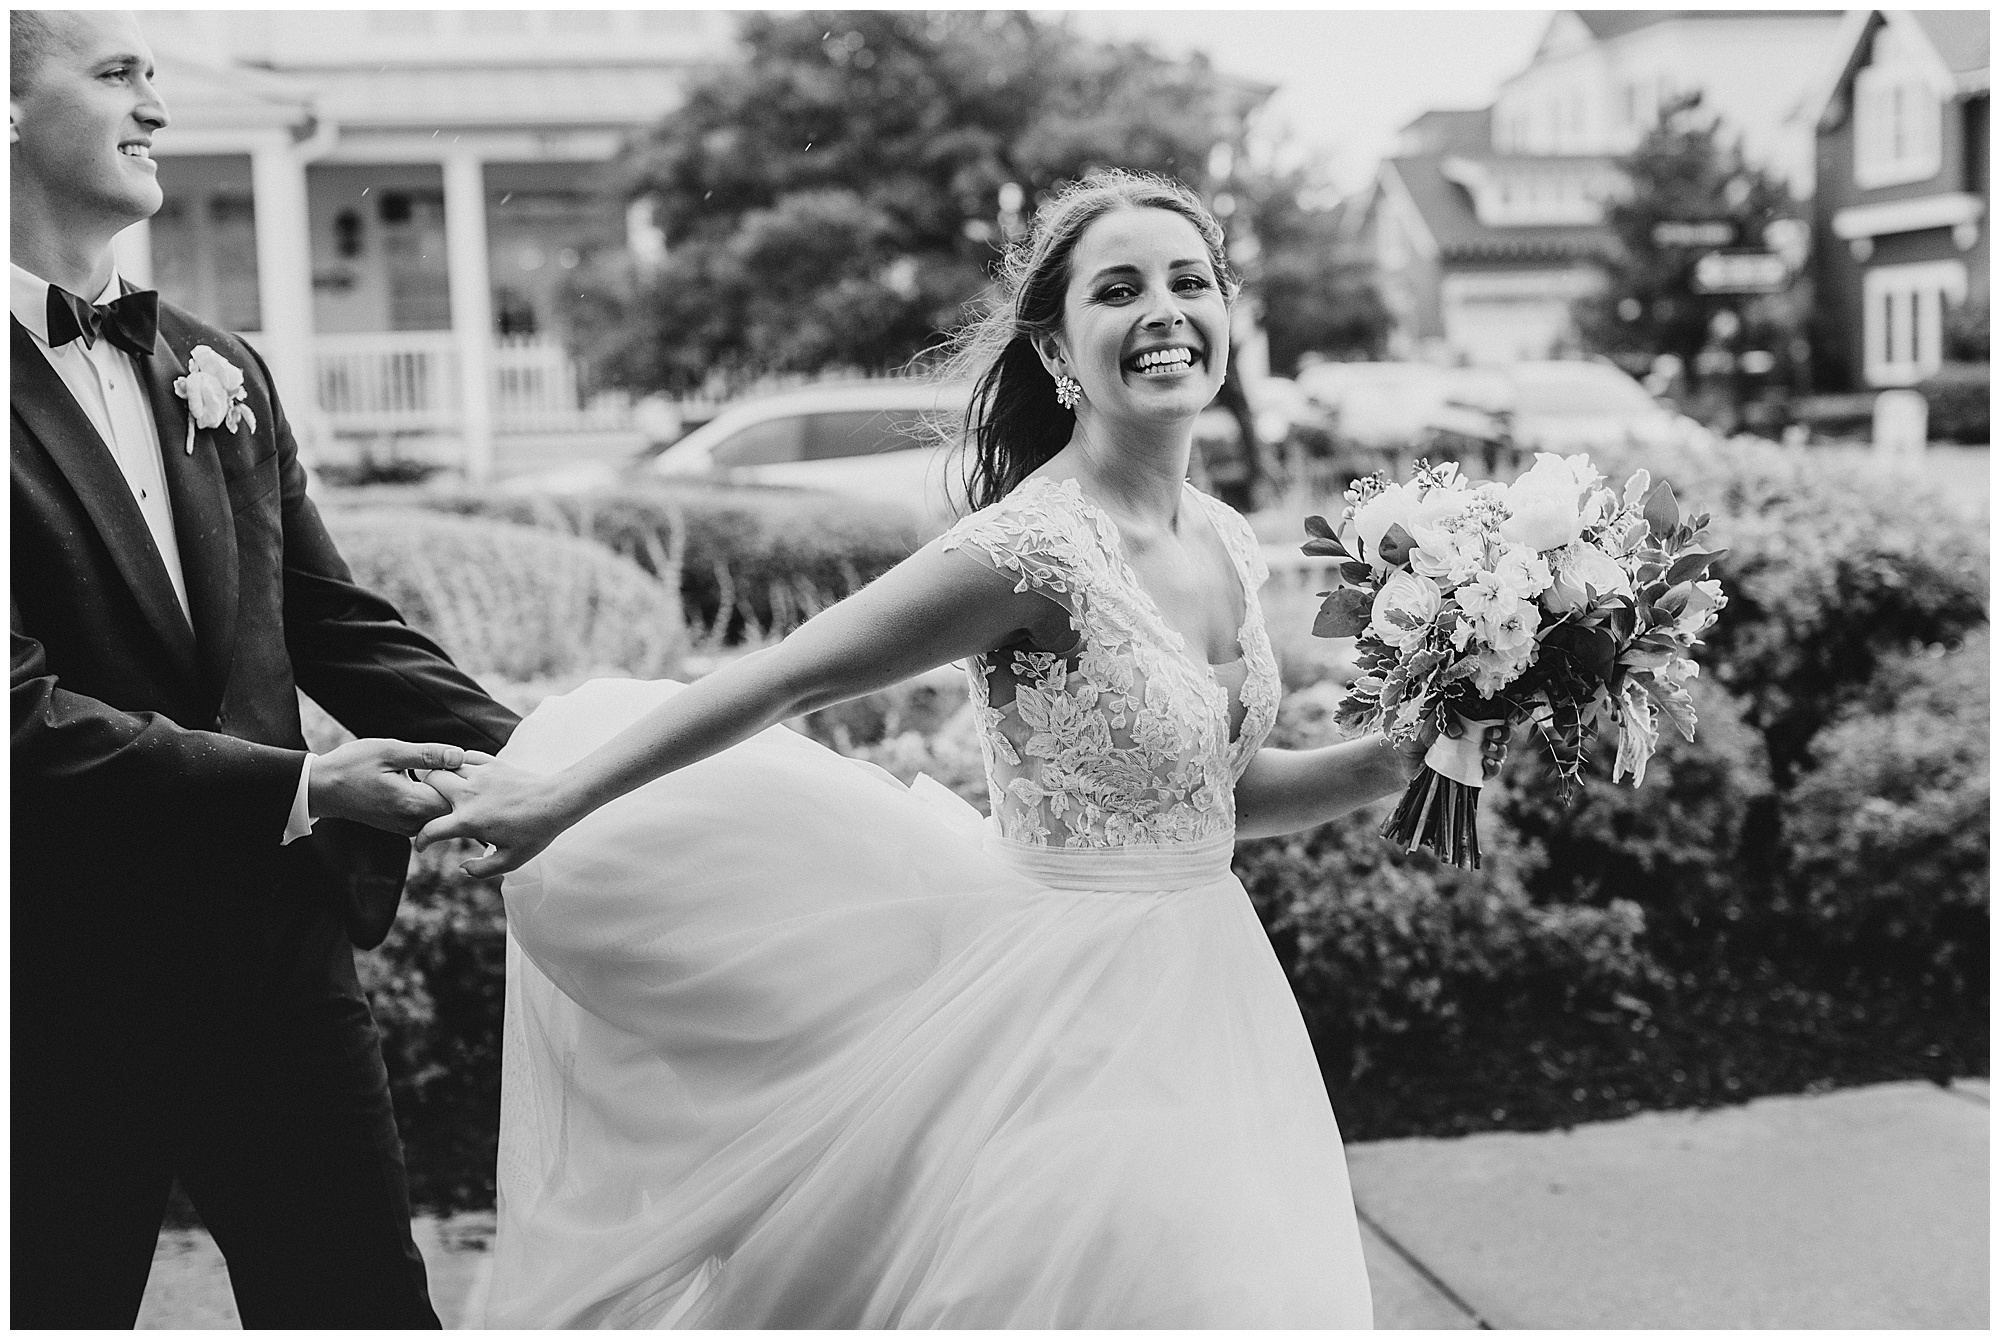 Danielle & Chris, East Beach wedding, Hampton Roads weddings, Kelley Stinson Photography, lace and tulle bridal gown